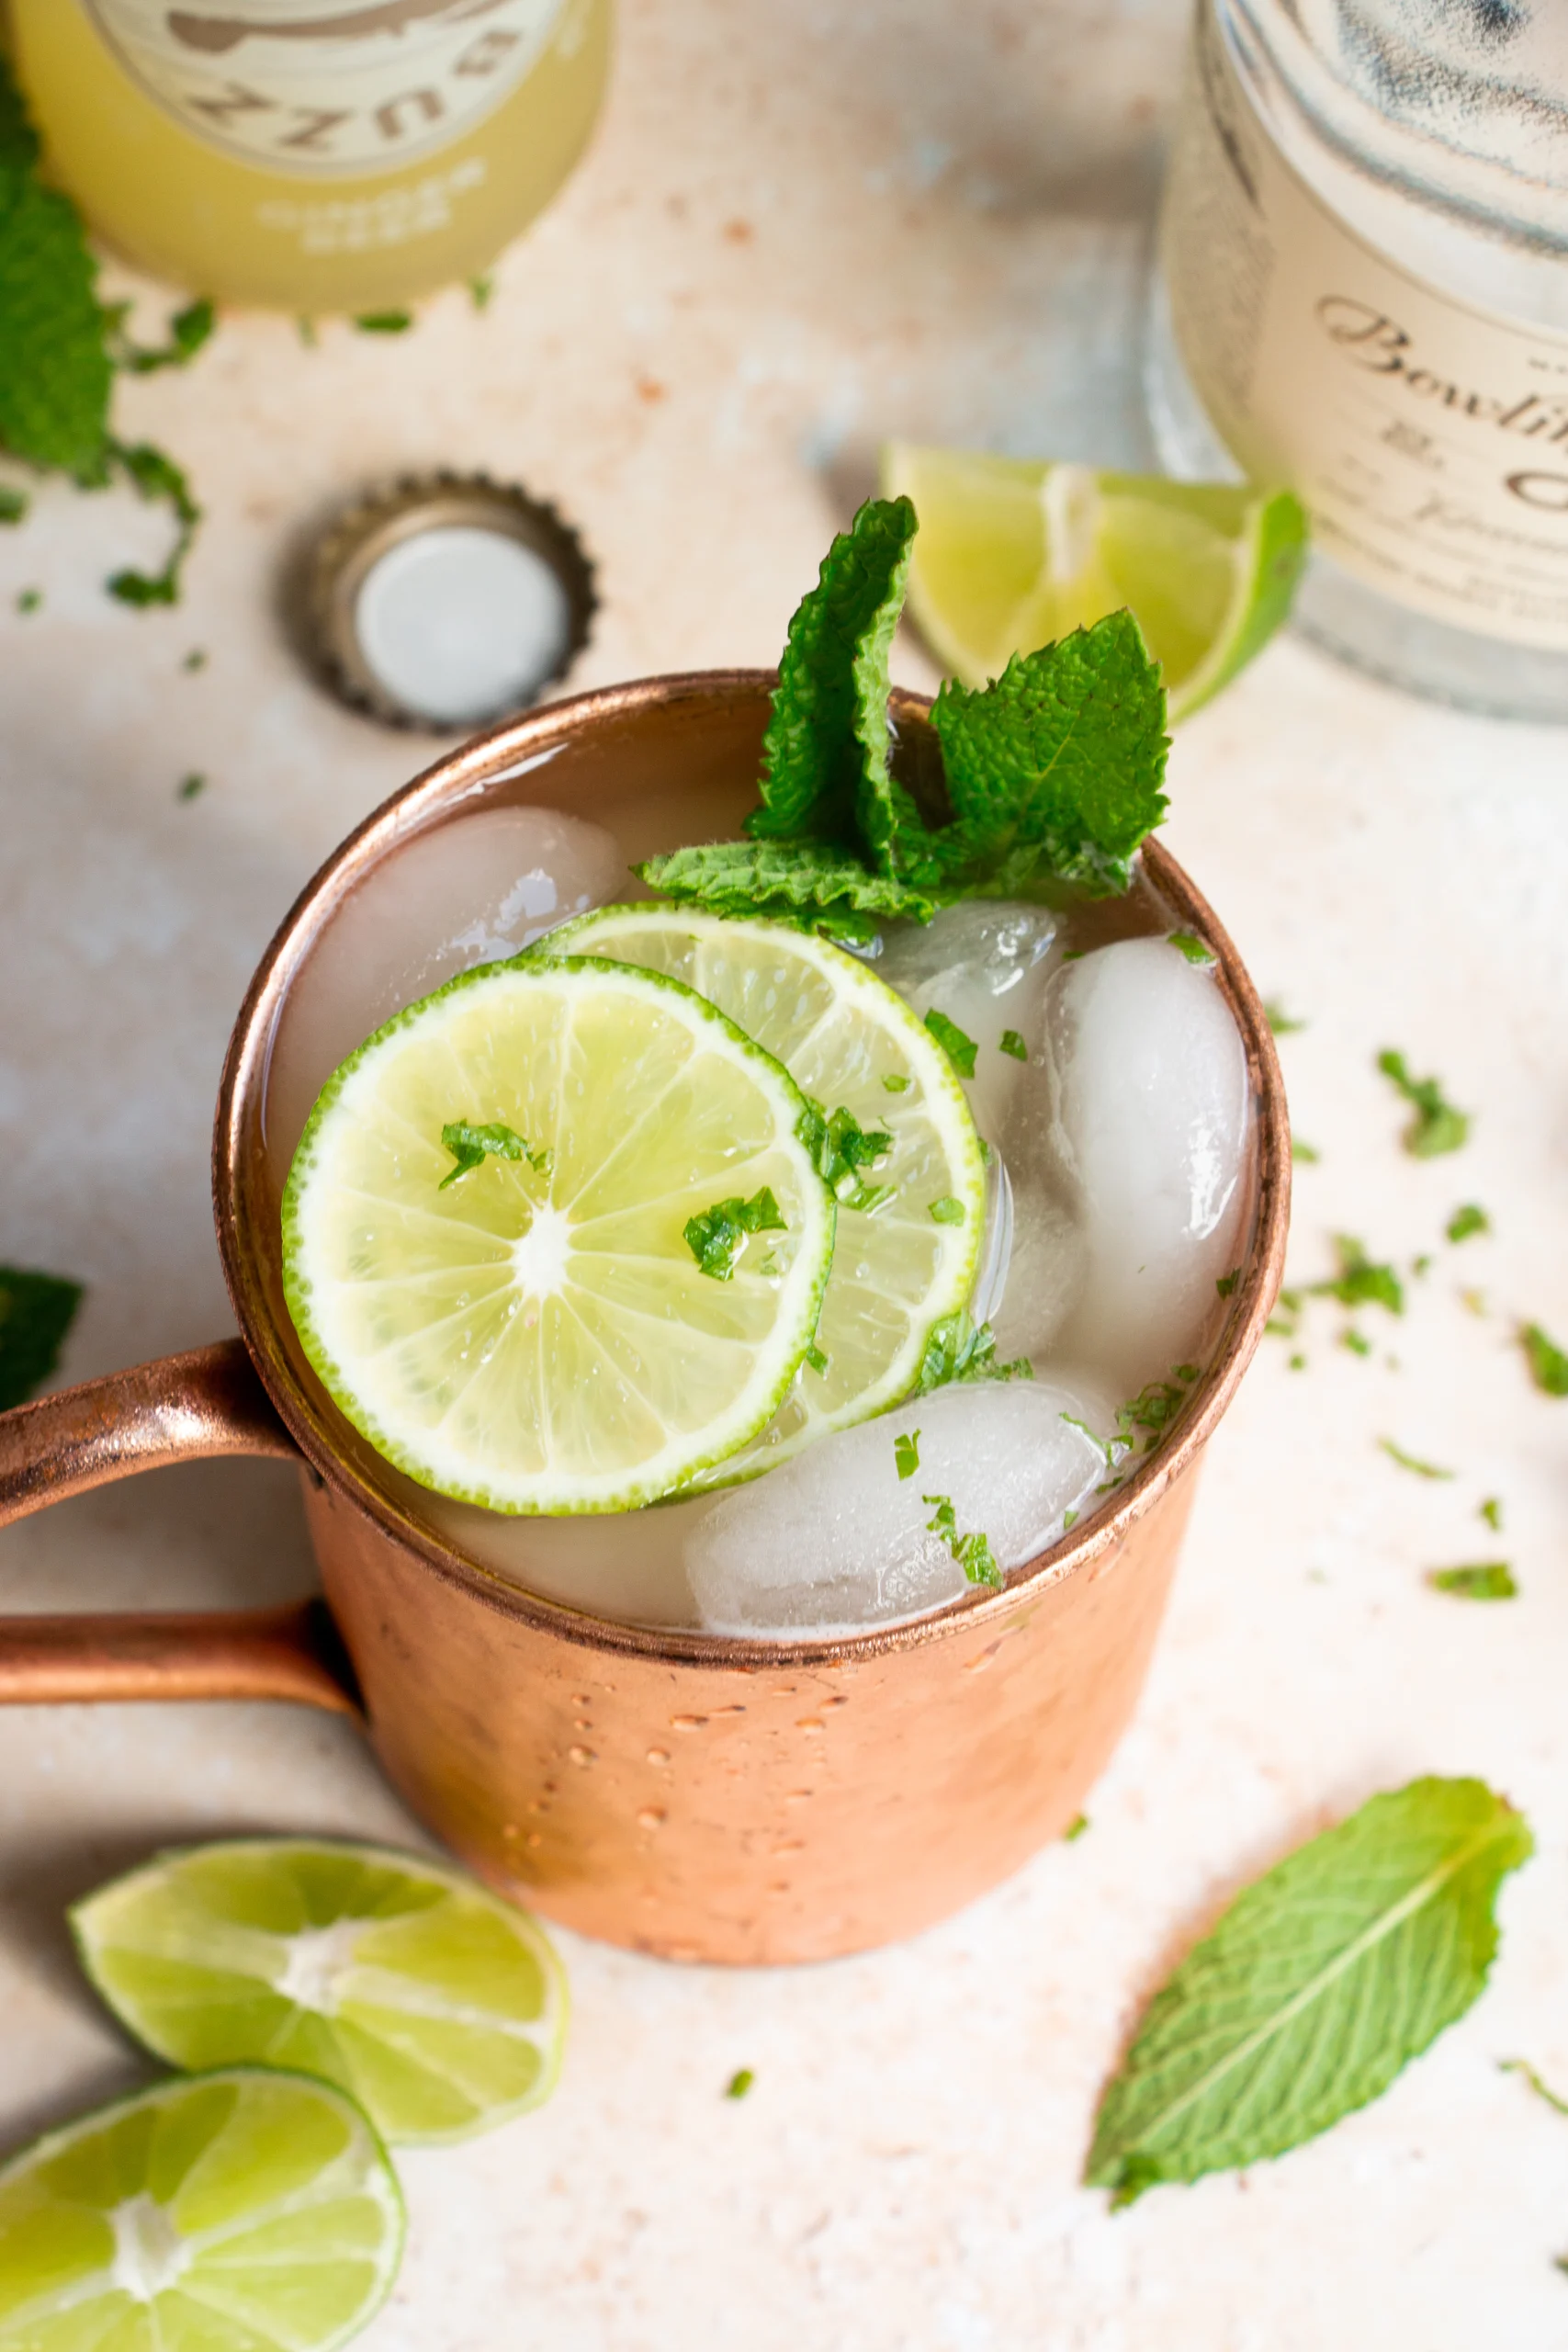 Simple Gin Moscow Mule Recipe - The Hearty Life